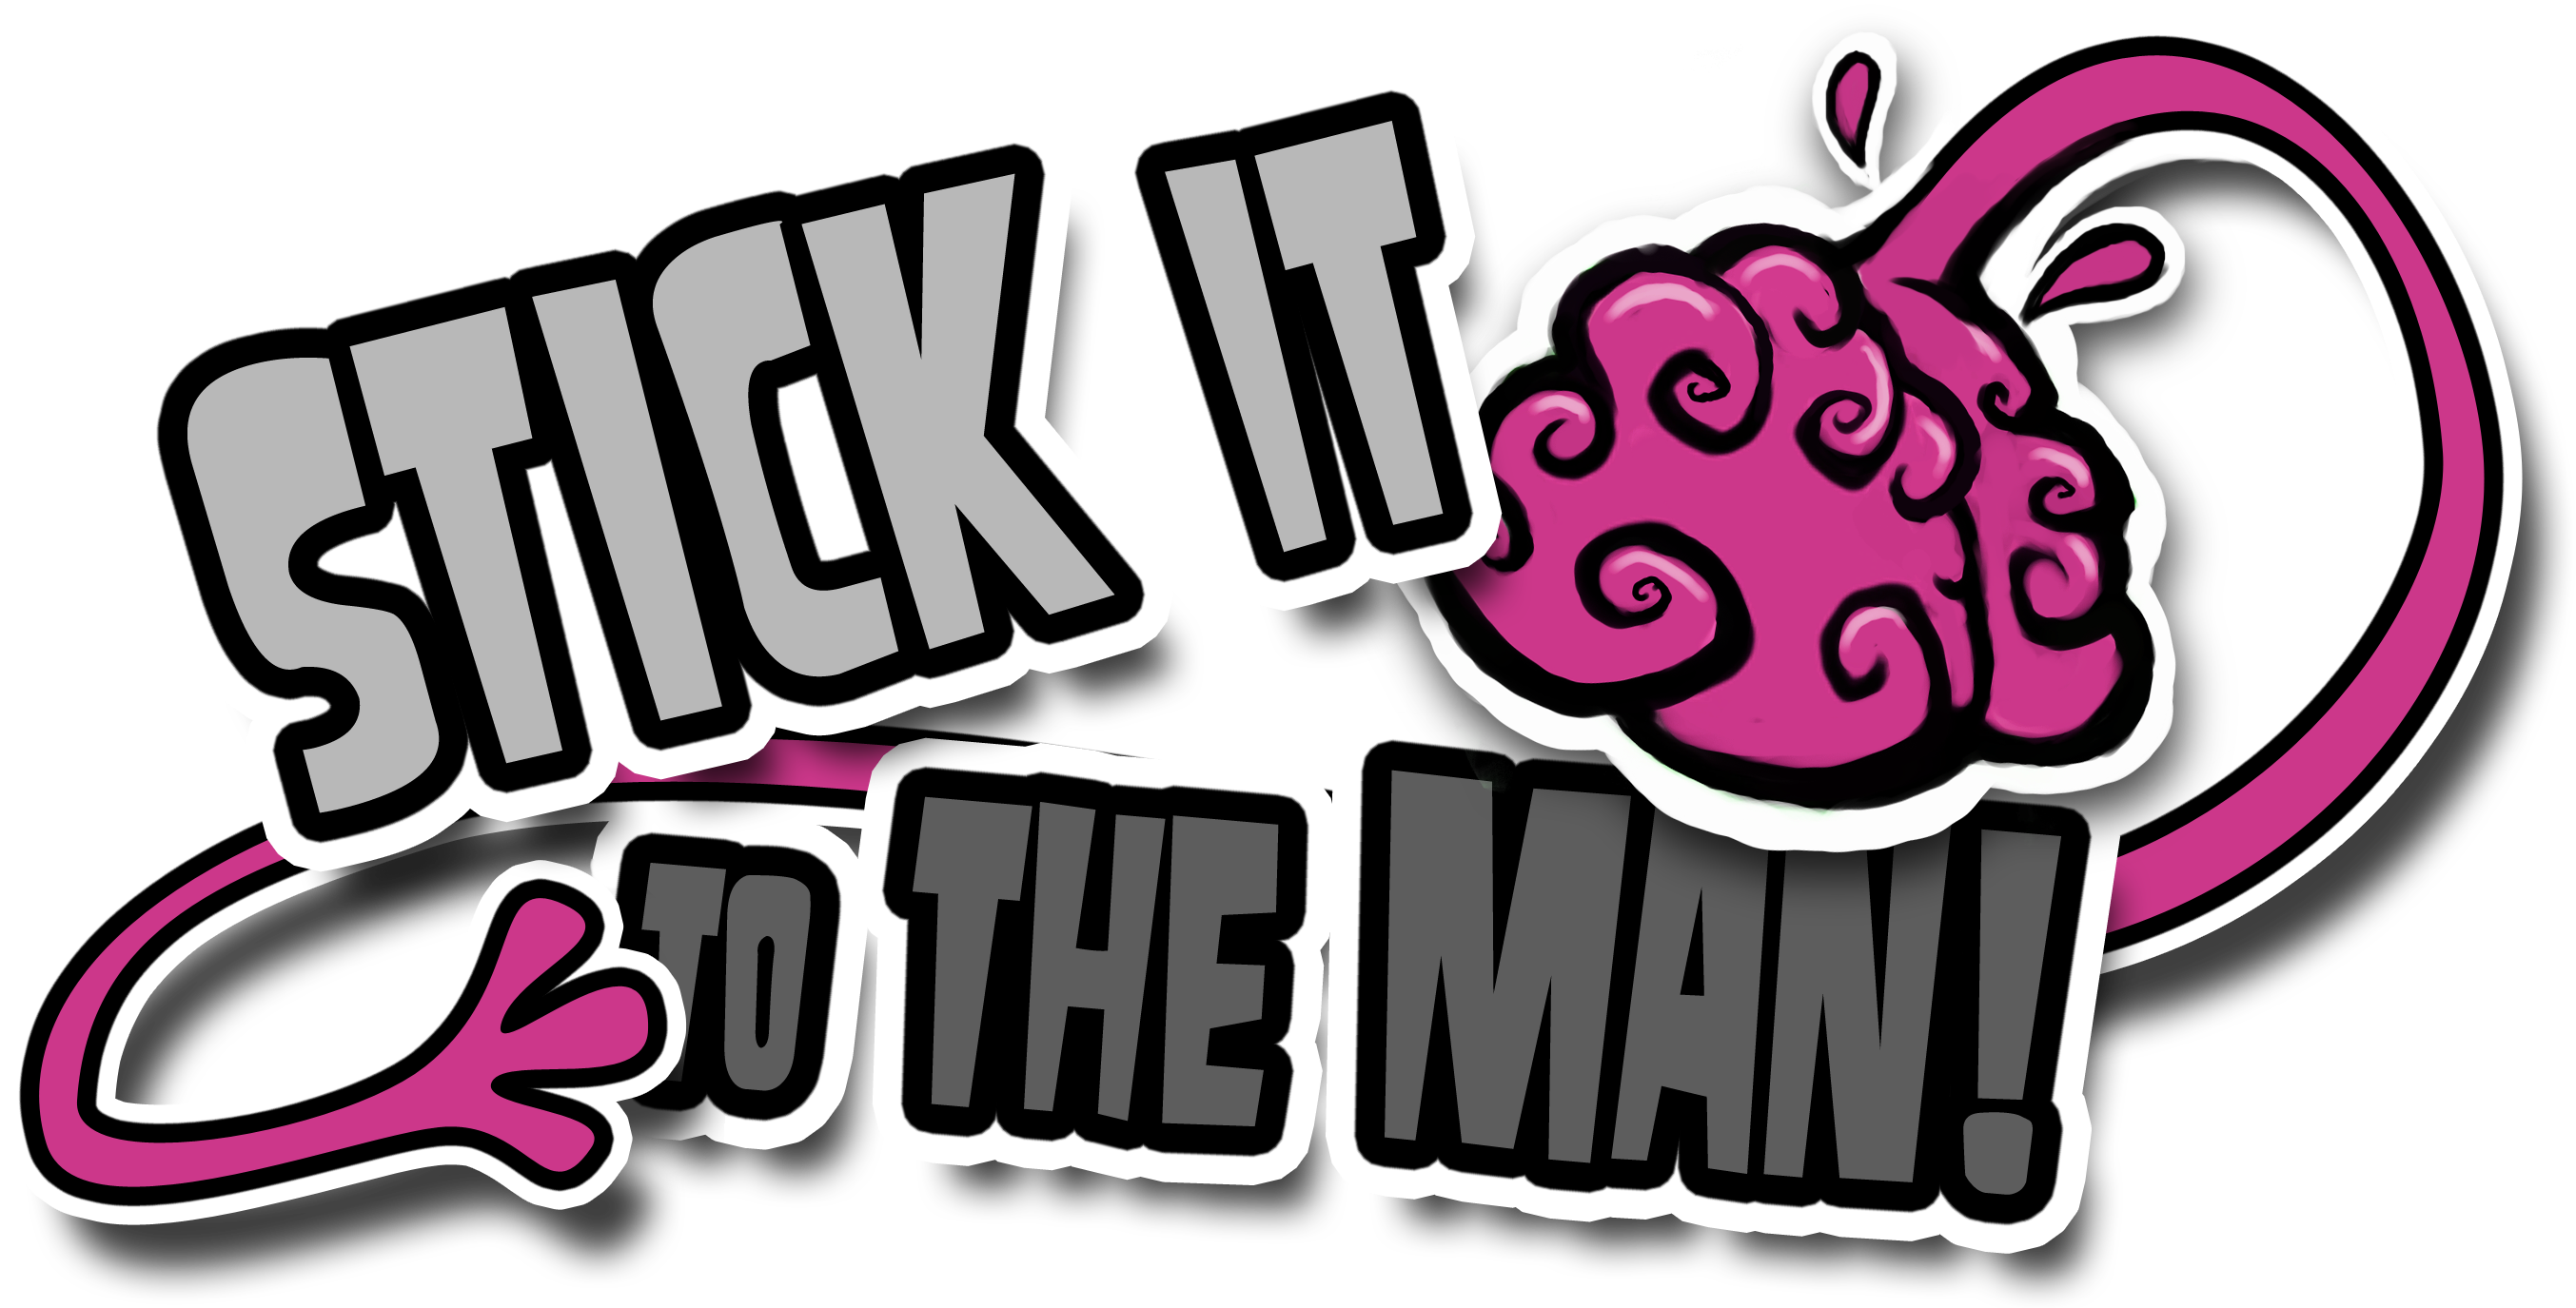 PR: Stick It To The Man is tearing up the Wii U eShop!